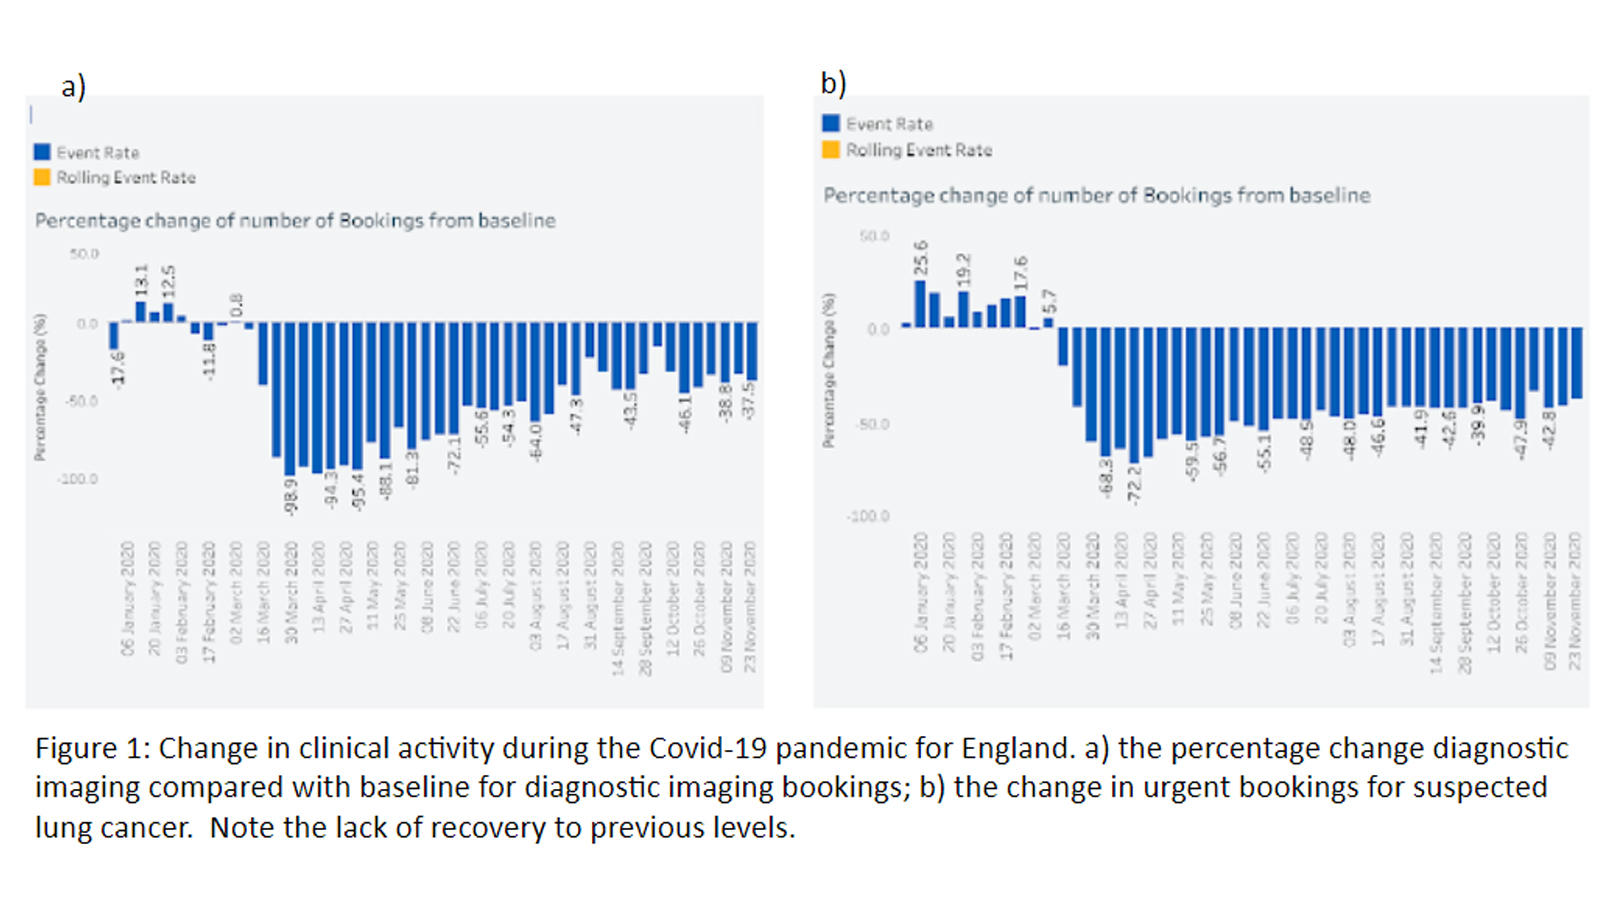 Figure 1: Change in clinical activity during the Covid-19 pandemic for England. a) the percentage change diagnostic imaging compared with baseline for diagnostic imaging bookings; b) the change in urgent bookings for suspected lung cancer. Note the lack of recovery to previous levels.